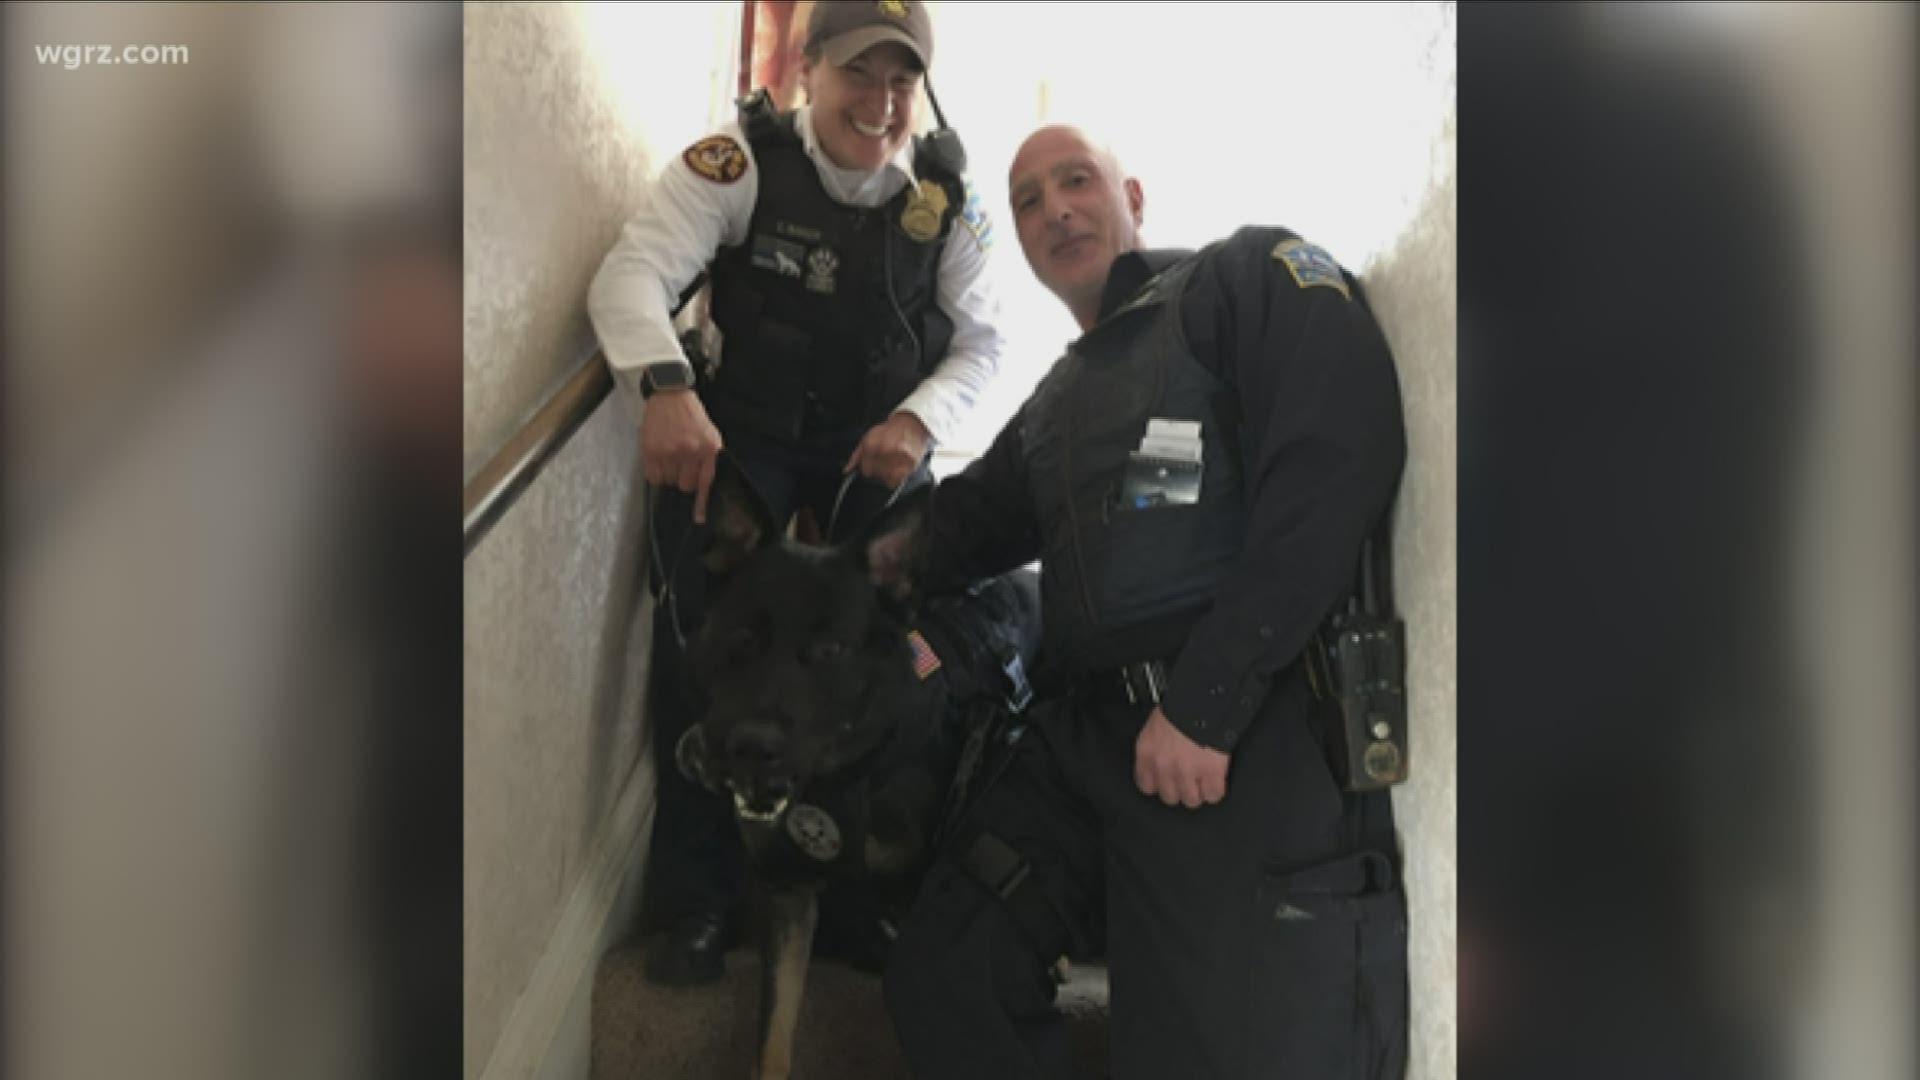 Police tracked him to a home in North Buffalo... where they say  Lt. Elizabeth Baker and K-9 Paddy were able to find him hiding under